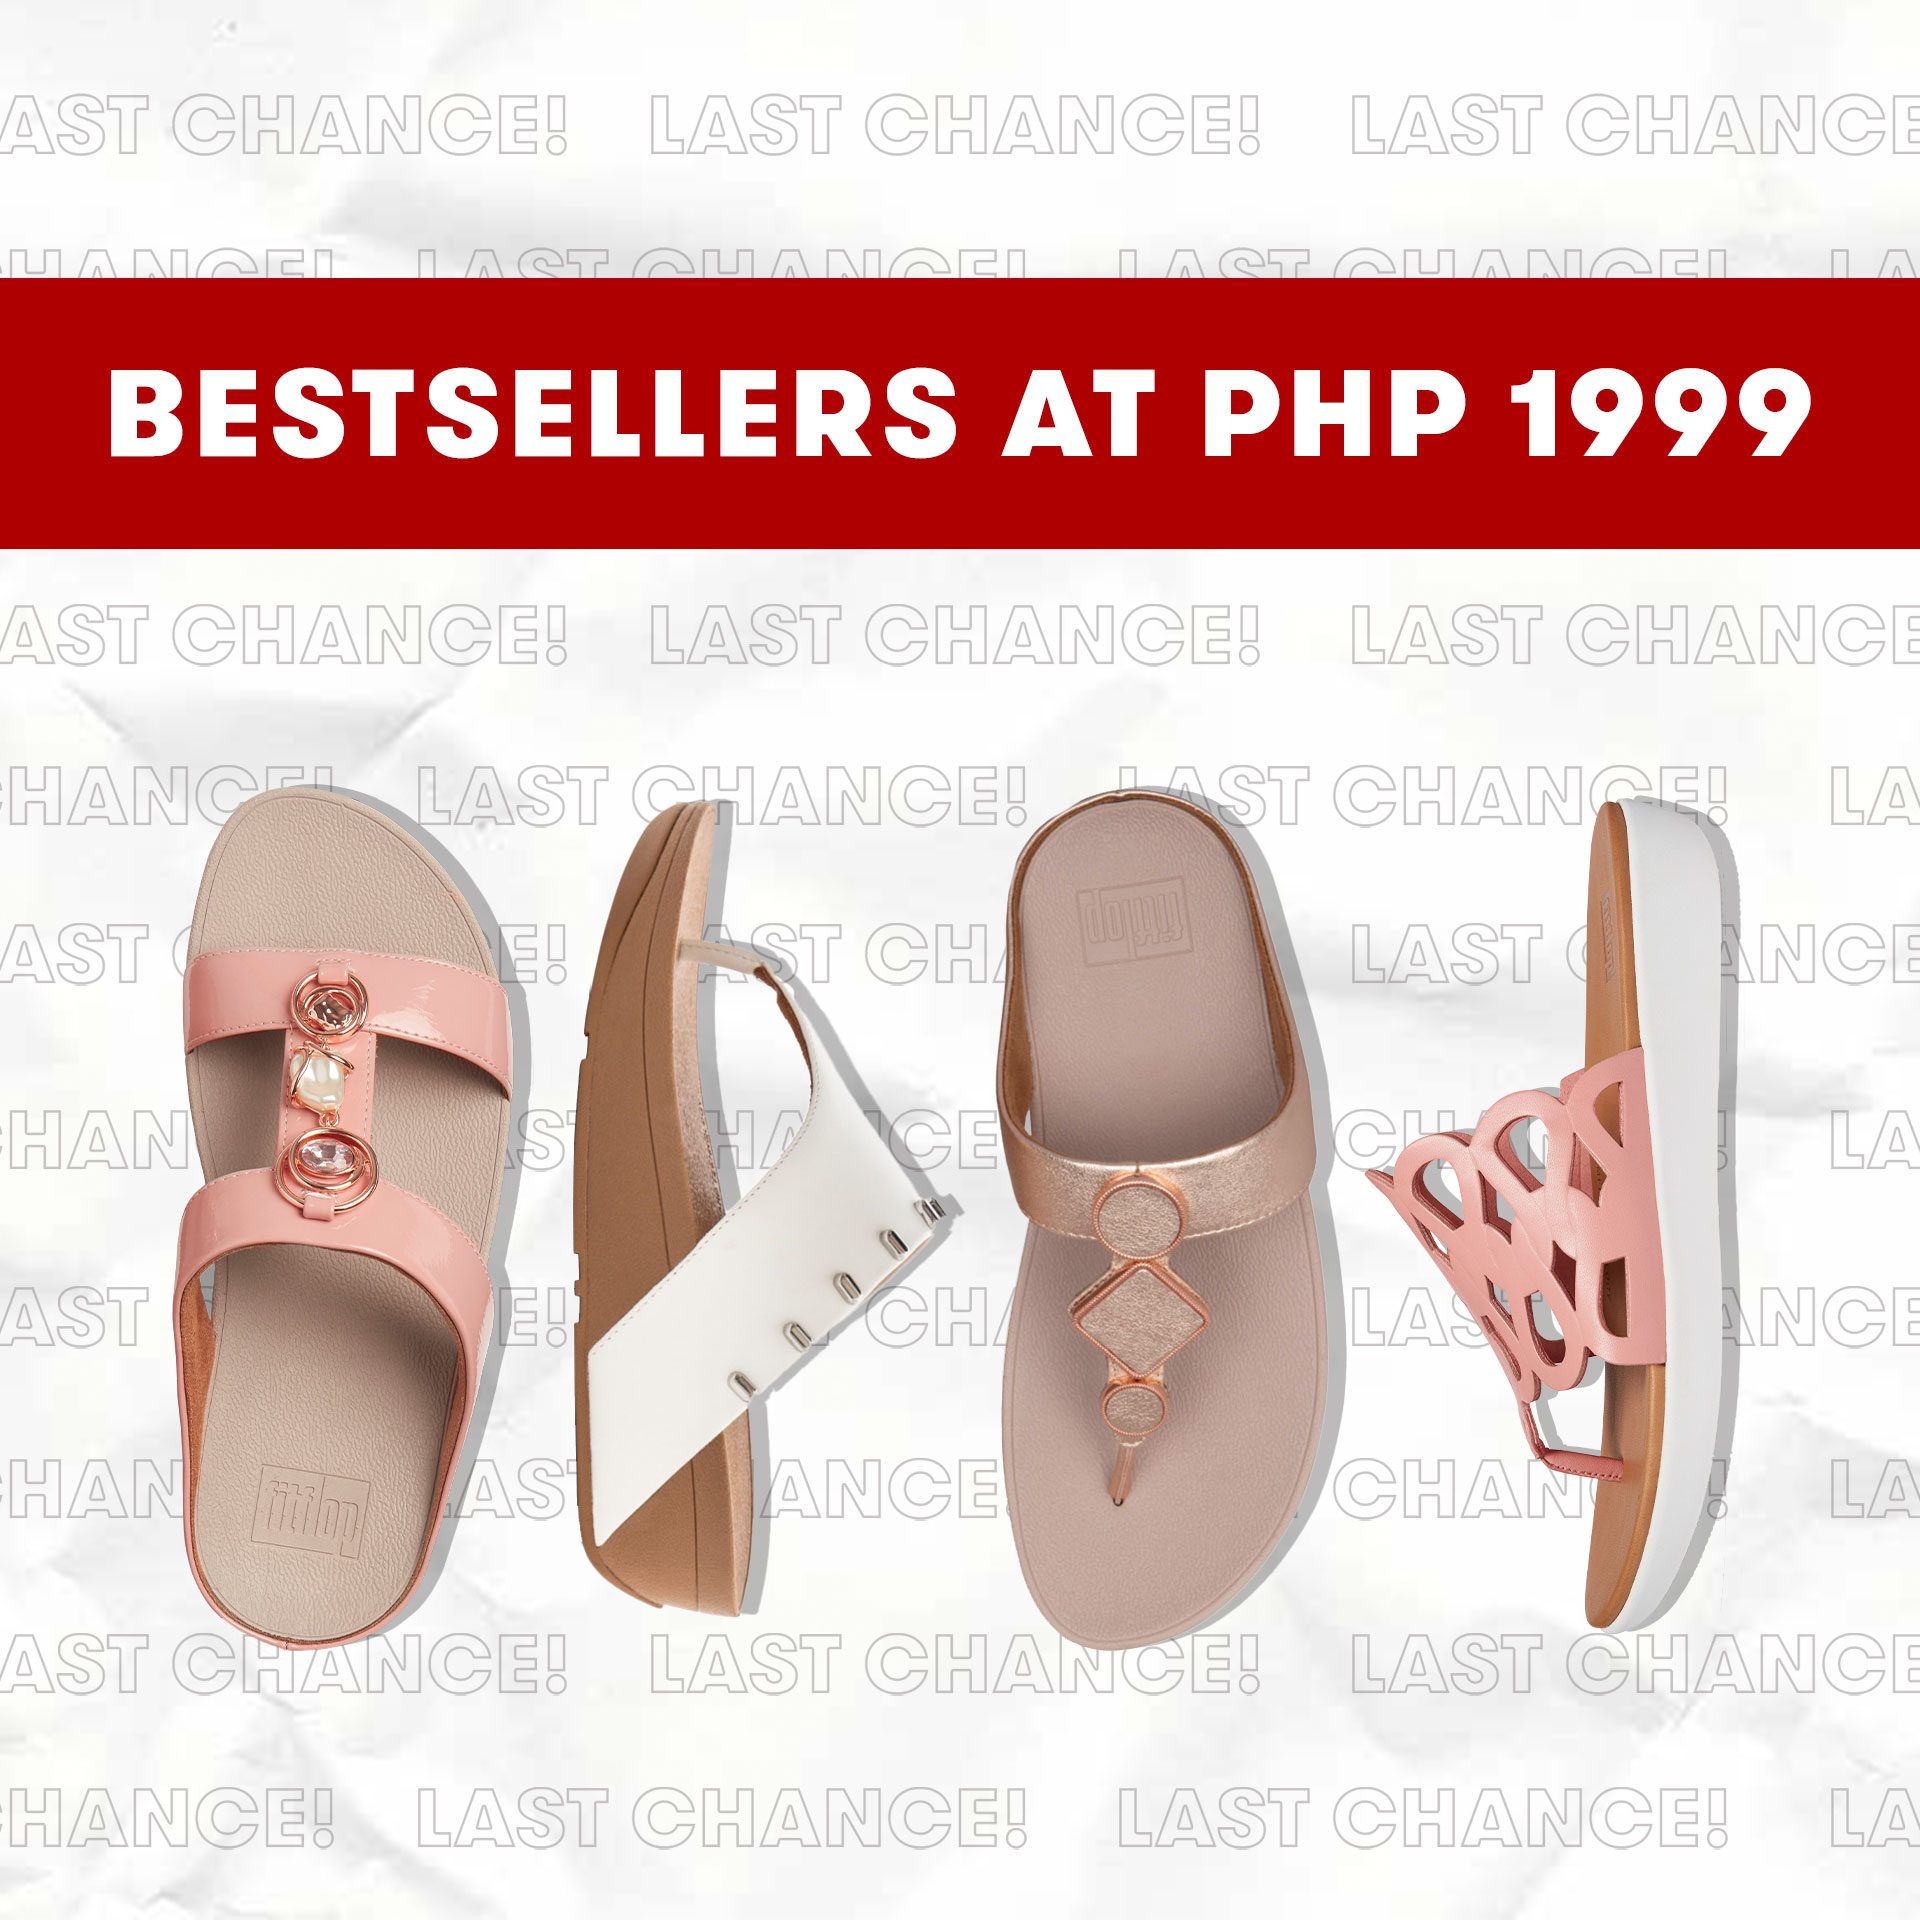 FitFlop bids goodbye to the Philippines